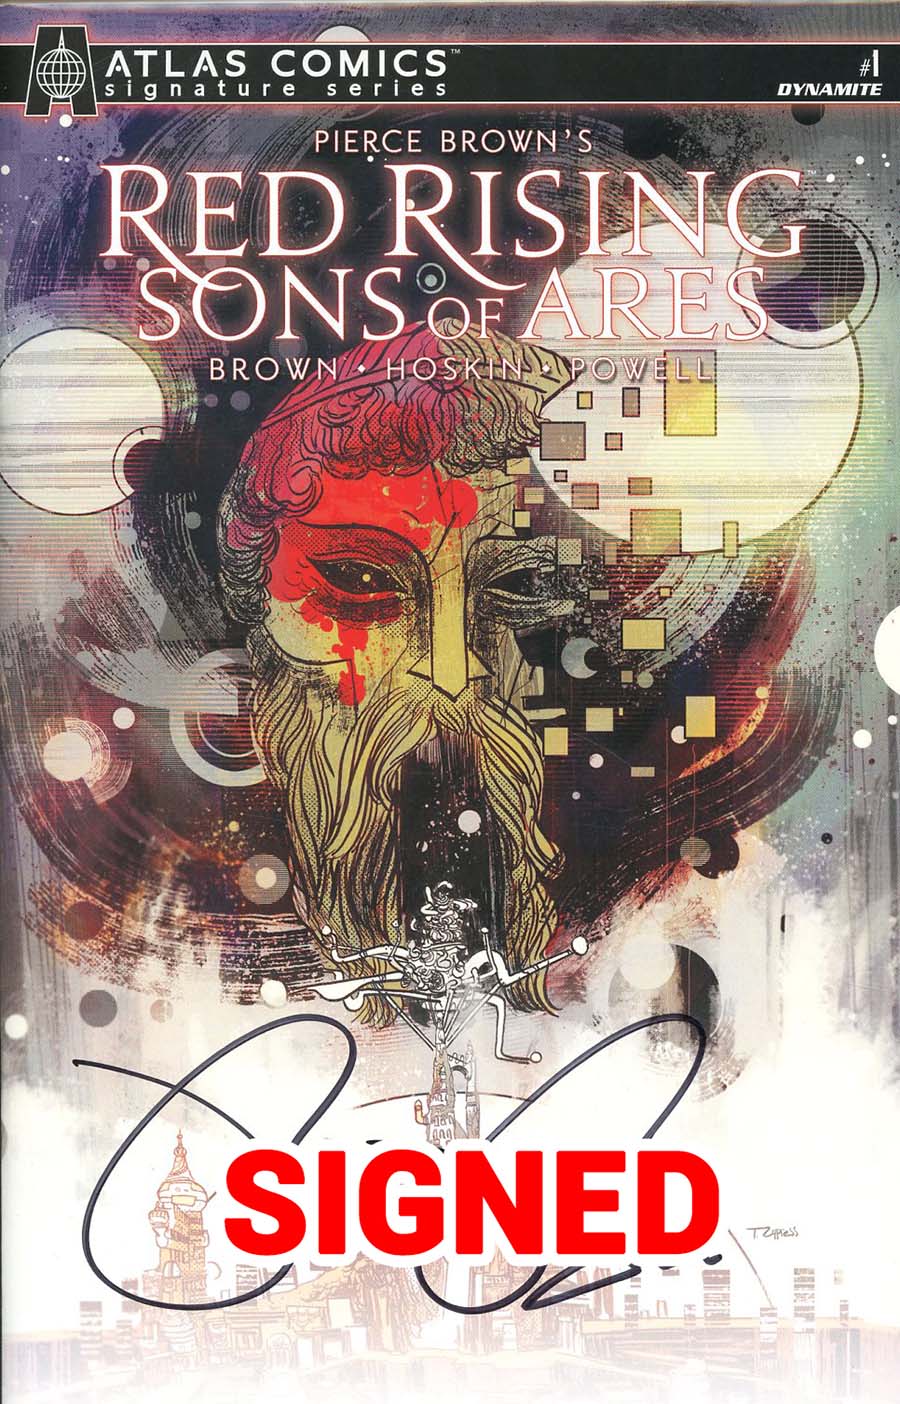 Pierce Browns Red Rising Sons Of Ares #1 Cover E Atlas Comics Signature Series Signed By Pierce Brown